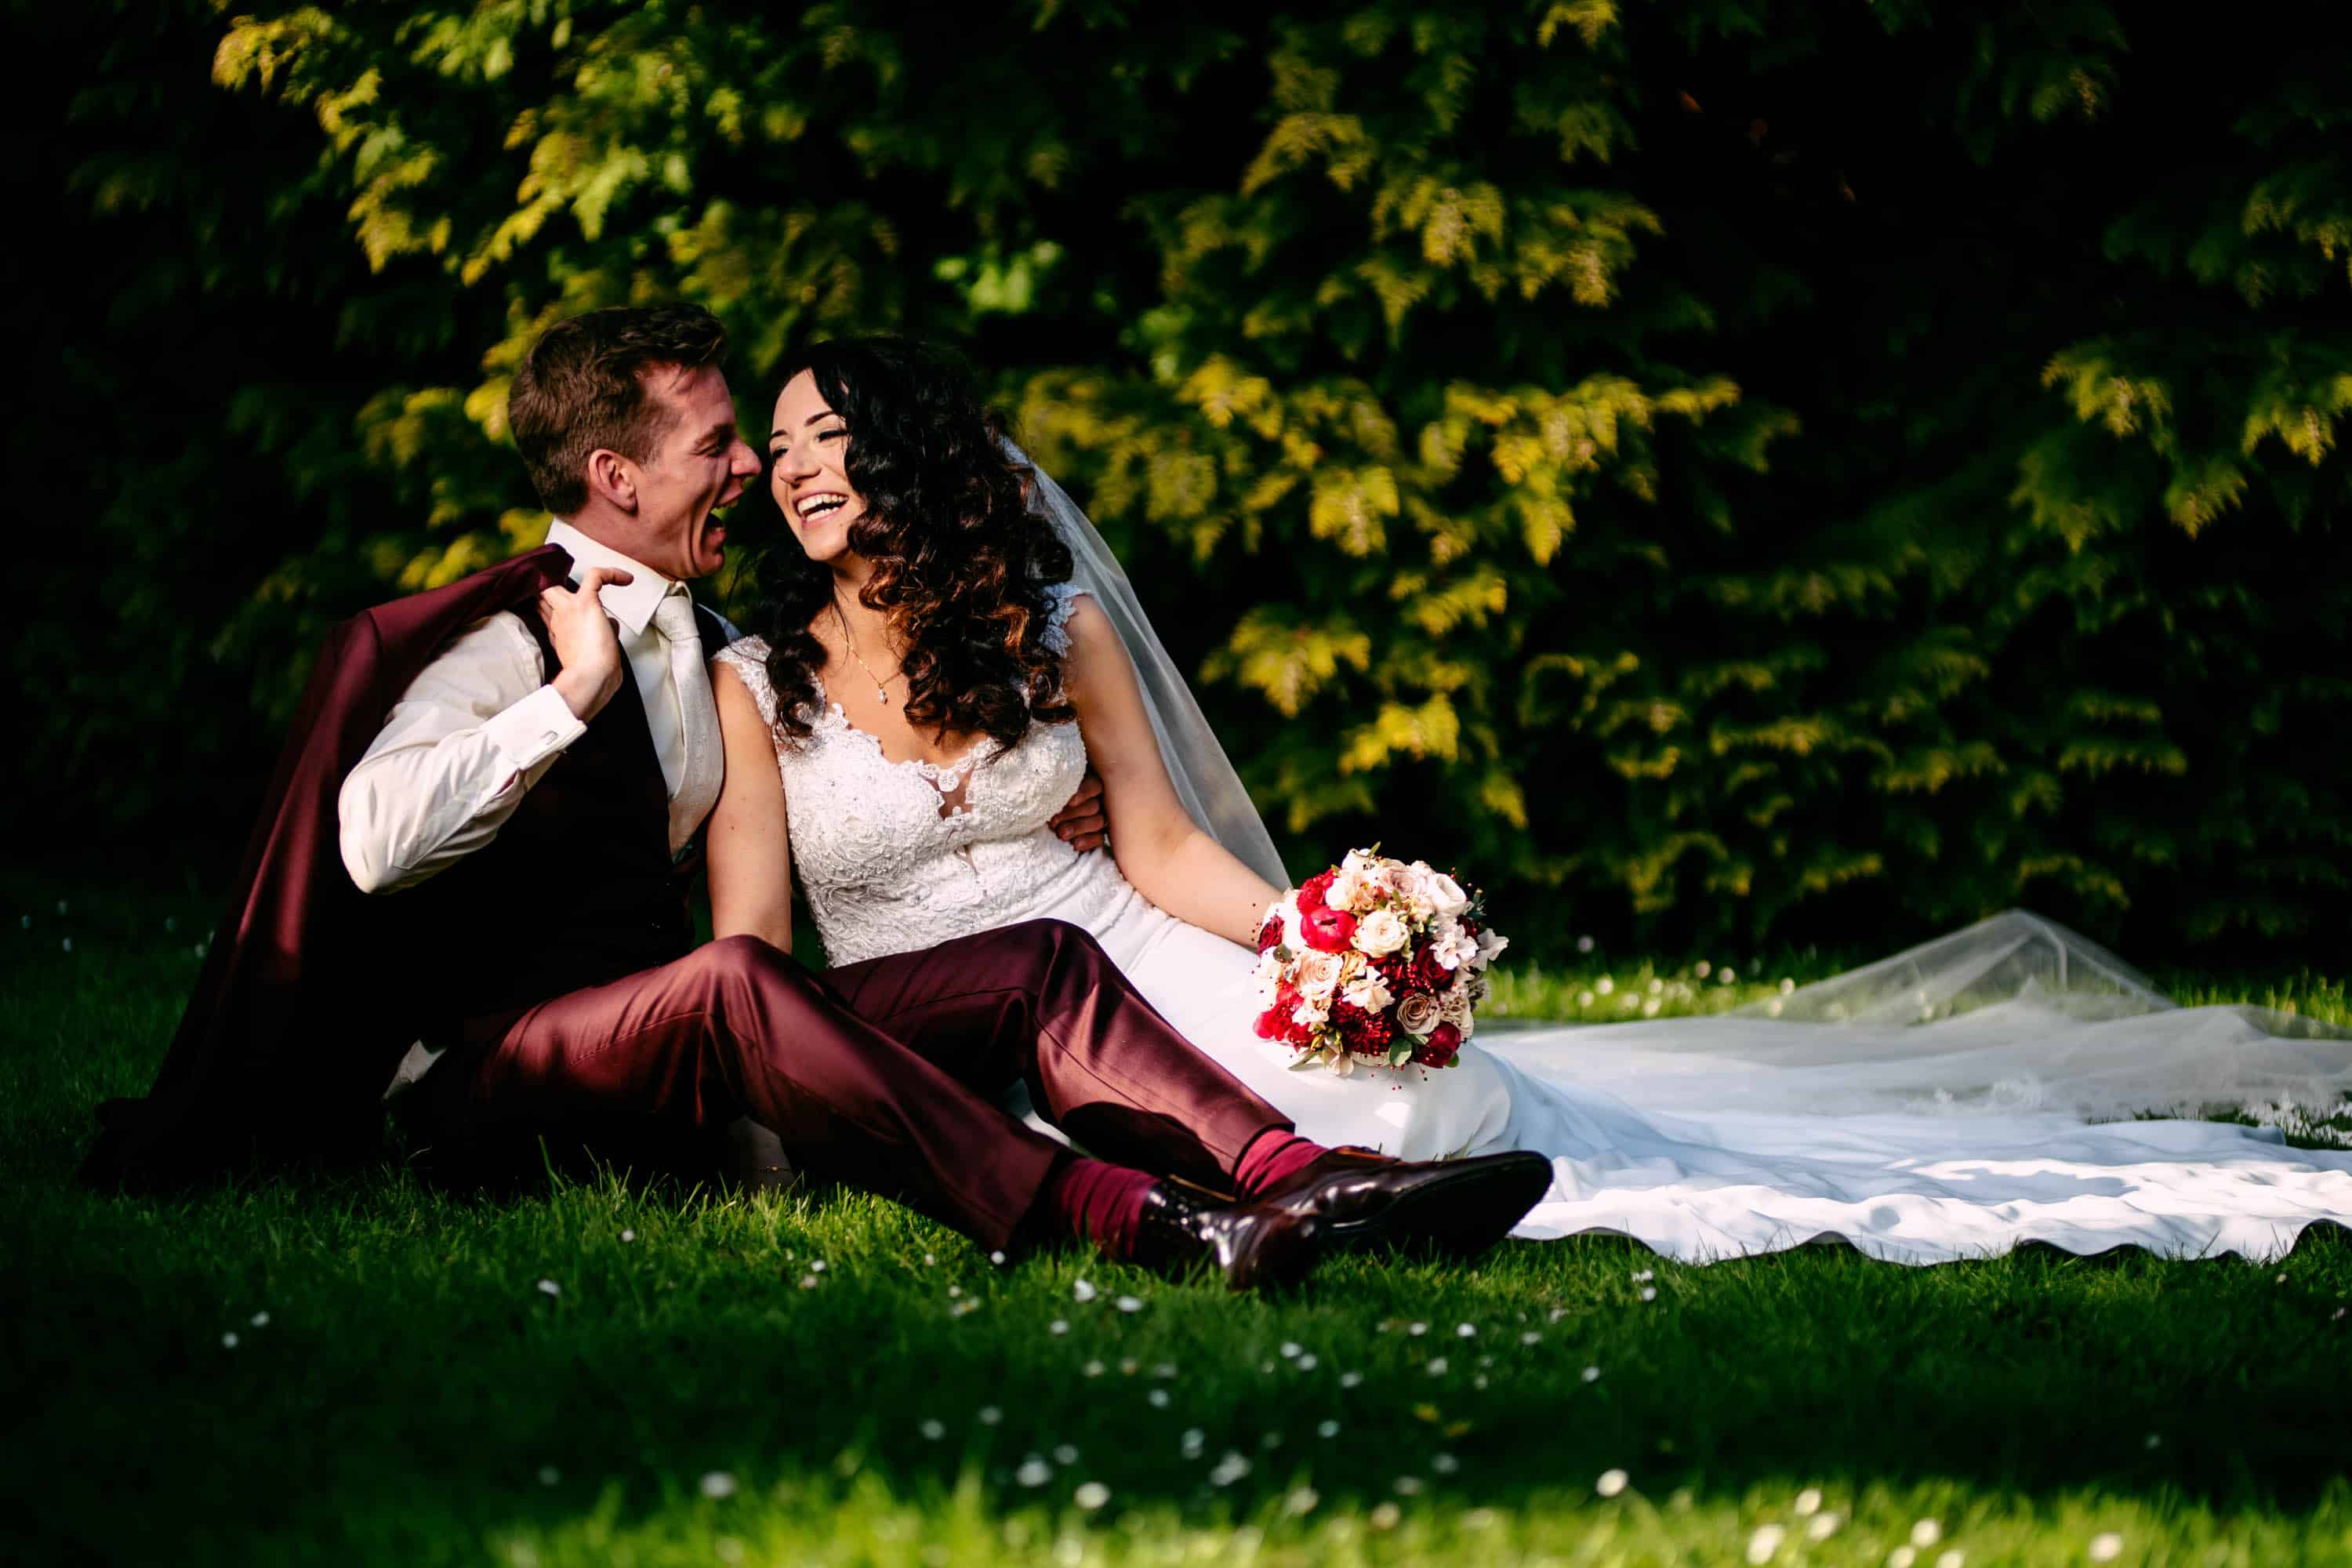 A bride and groom sitting on the grass.